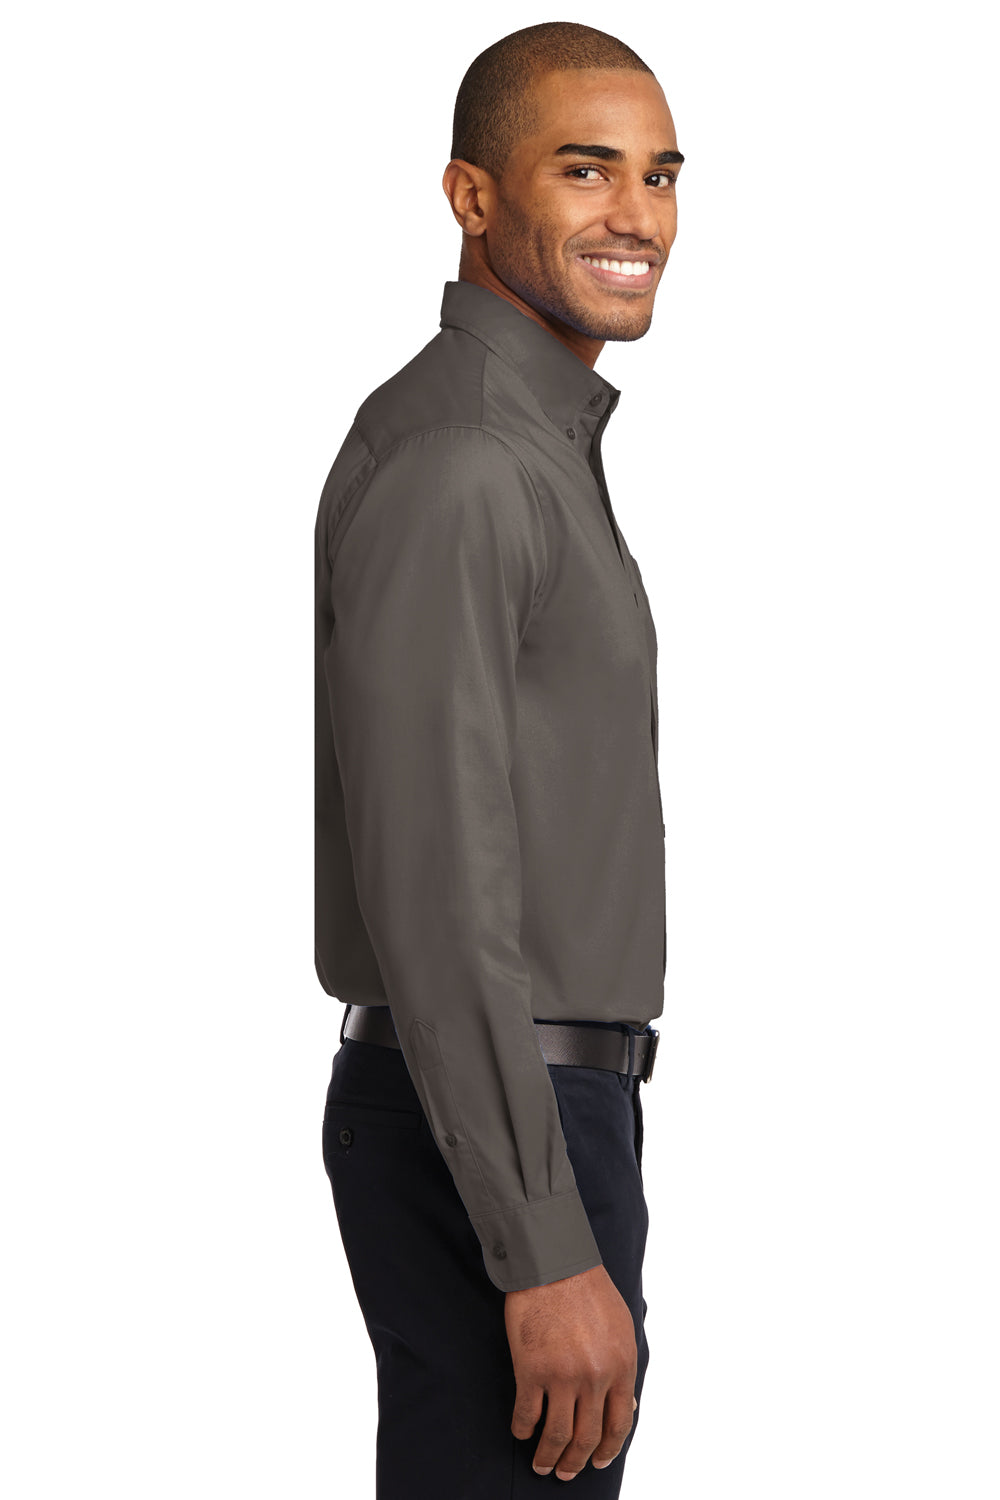 Port Authority S608/TLS608/S608ES Mens Easy Care Wrinkle Resistant Long Sleeve Button Down Shirt w/ Pocket Bark Brown Side